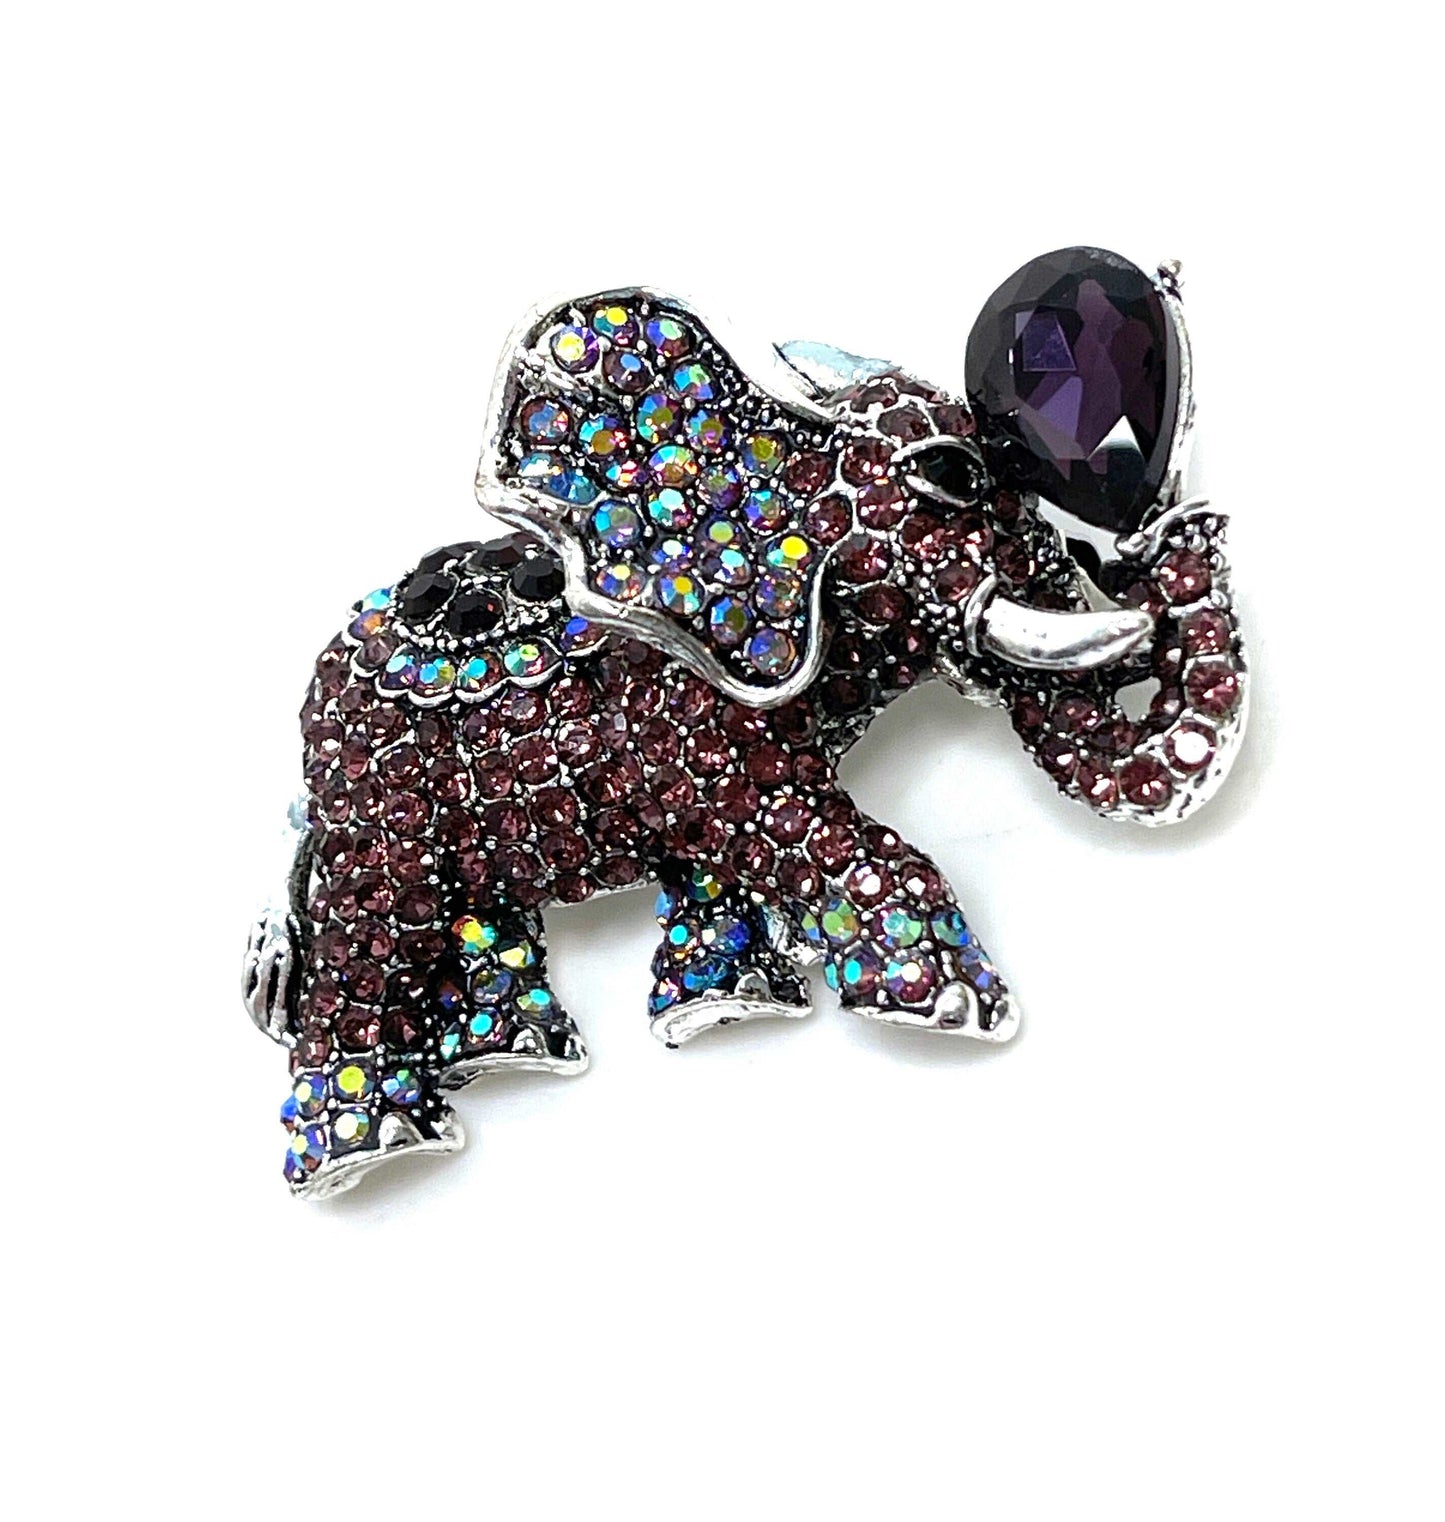 Large Purple Indian Elephant Brooch, Sparkly Elephant Pin, Crystal Animal Pin, Multi Crystal Diamonte Pin, Brooches For Women